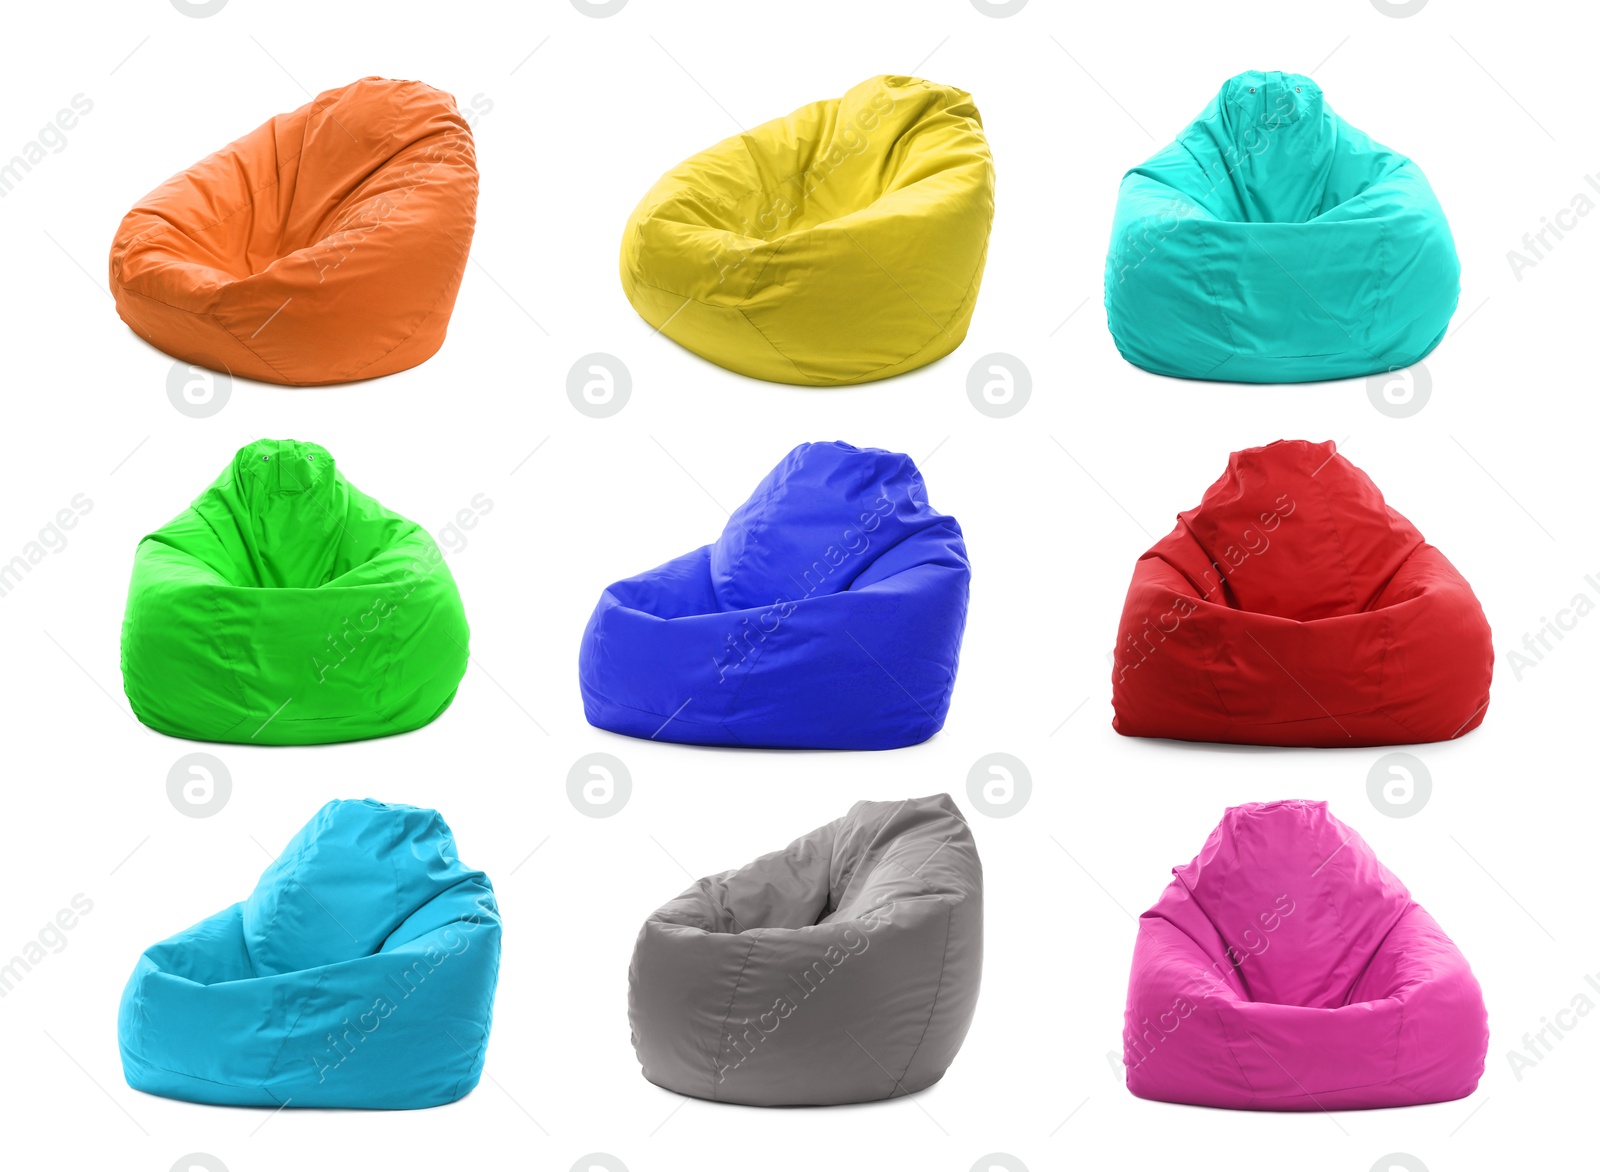 Image of Different bean bag chairs isolated on white, set